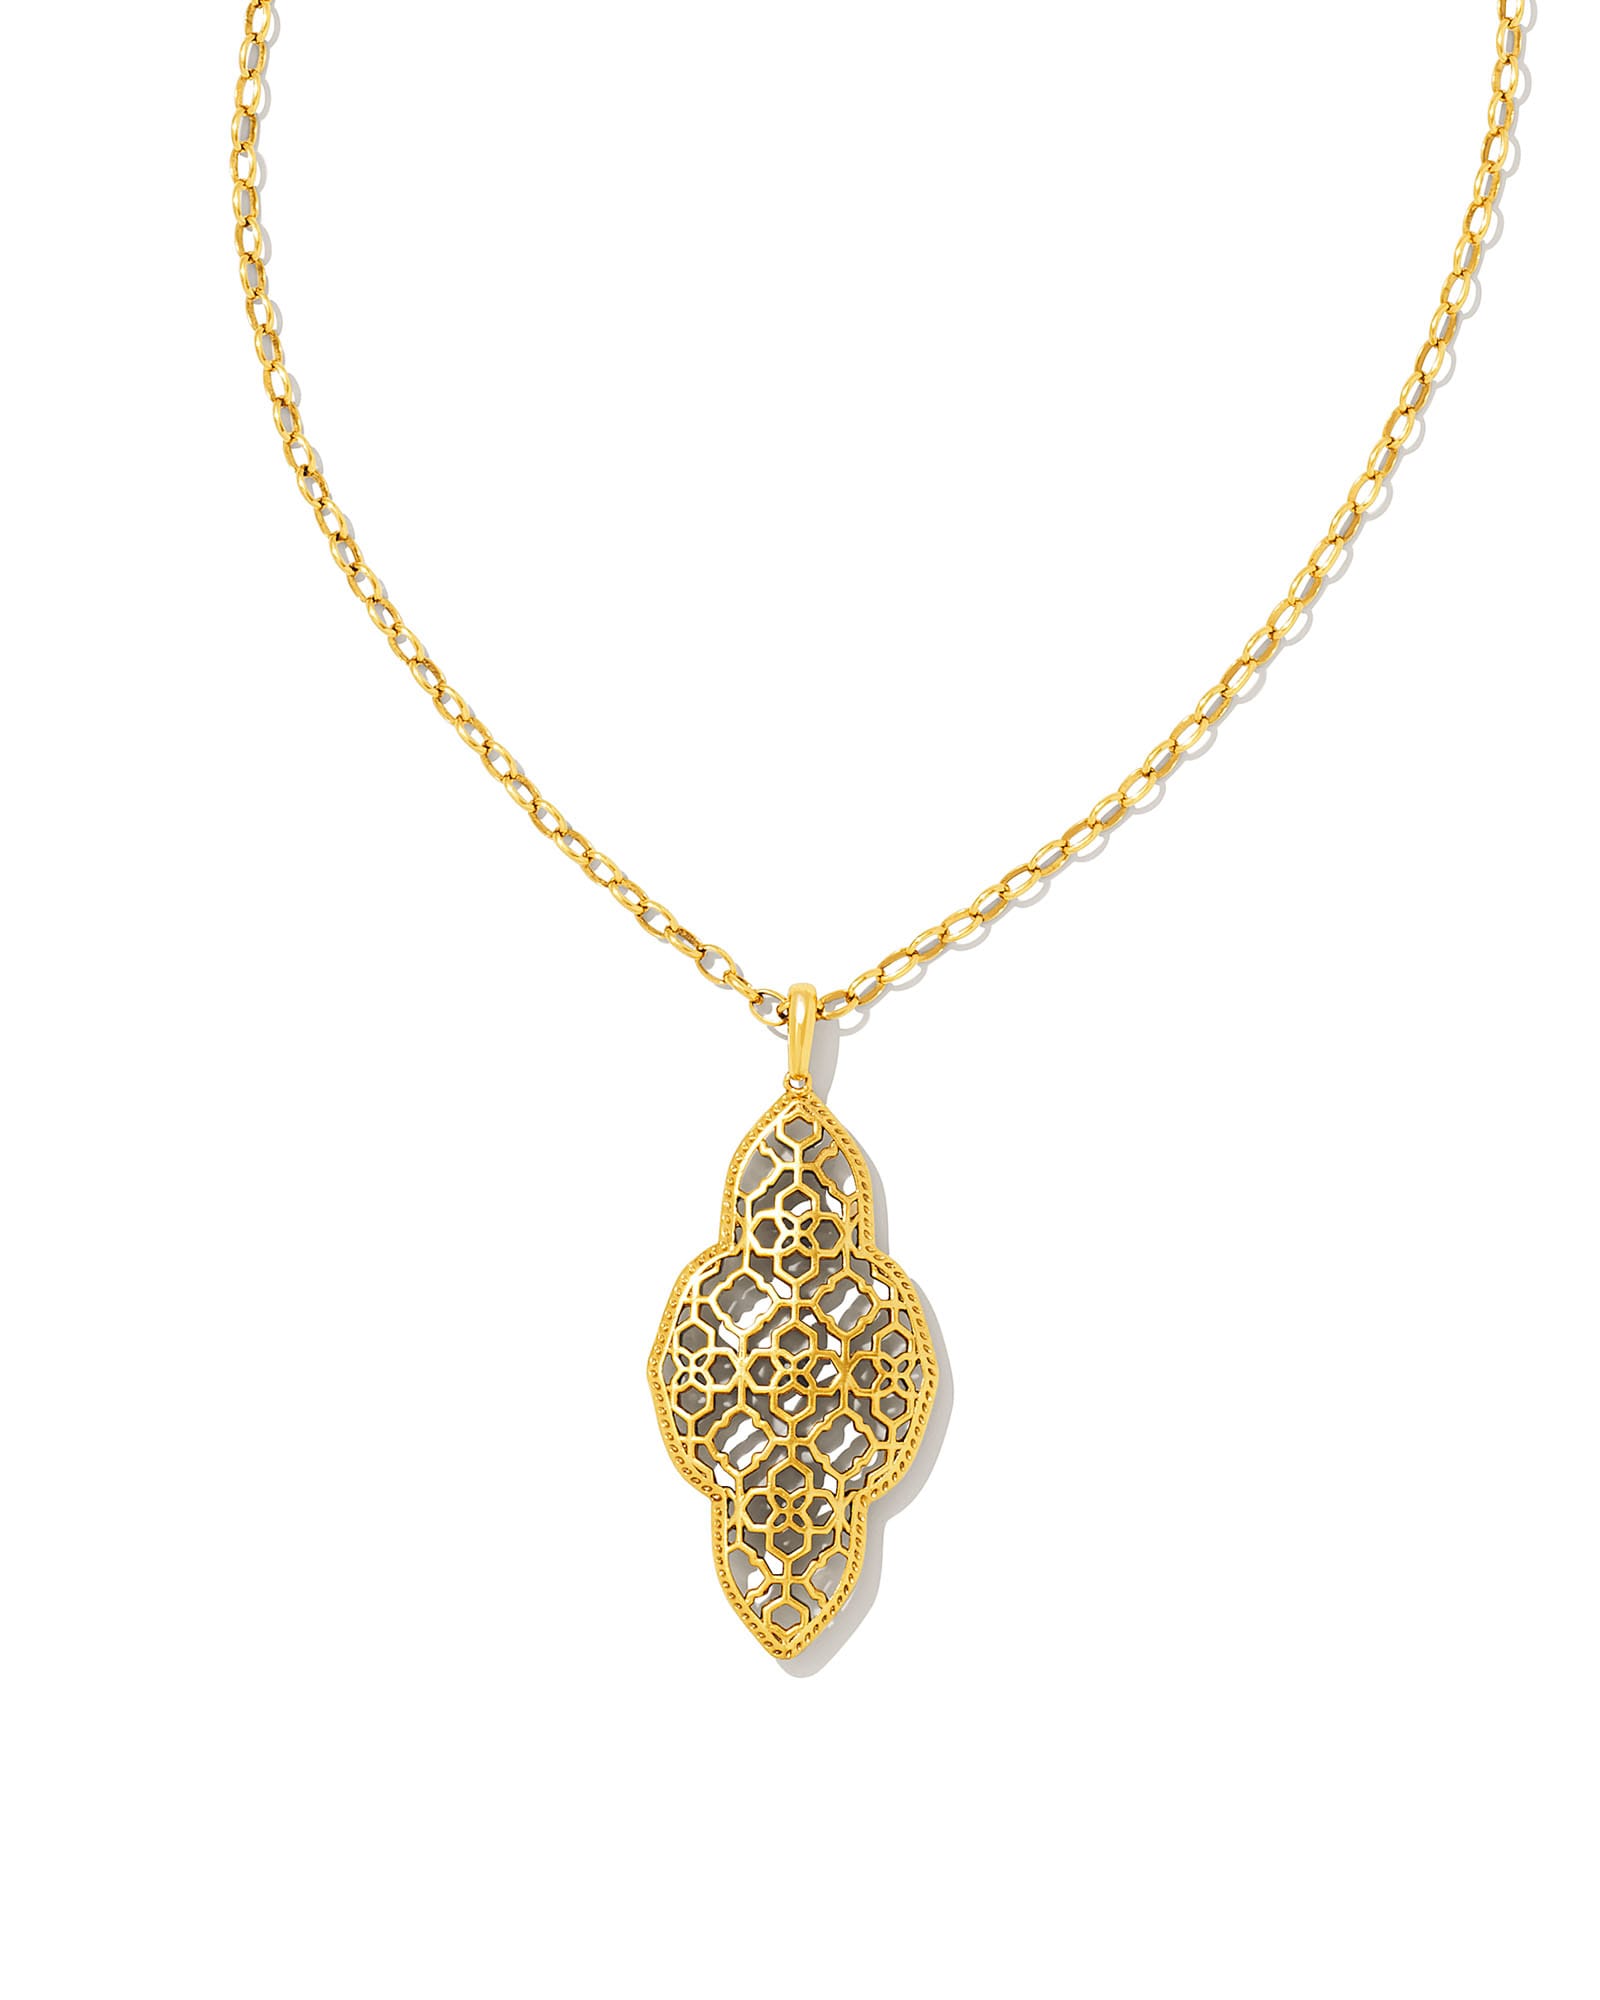 Kendra Scott Abbie Long Pendant Necklace in Vintage Gold | Plated Brass/Metal